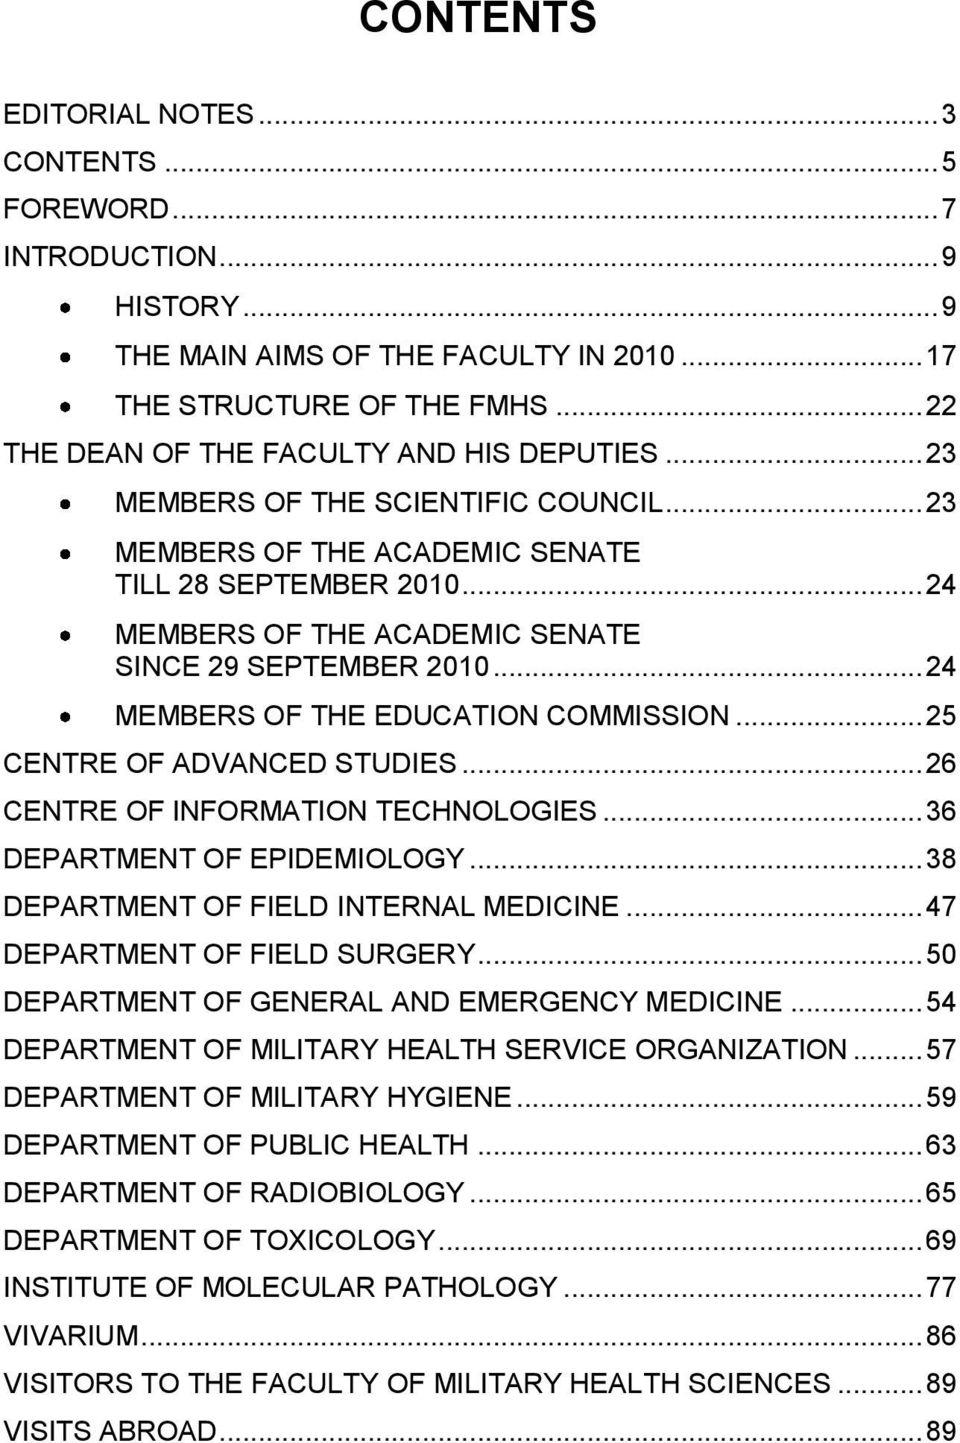 .. 24 MEMBERS OF THE ACADEMIC SENATE SINCE 29 SEPTEMBER 2010... 24 MEMBERS OF THE EDUCATION COMMISSION... 25 CENTRE OF ADVANCED STUDIES... 26 CENTRE OF INFORMATION TECHNOLOGIES.